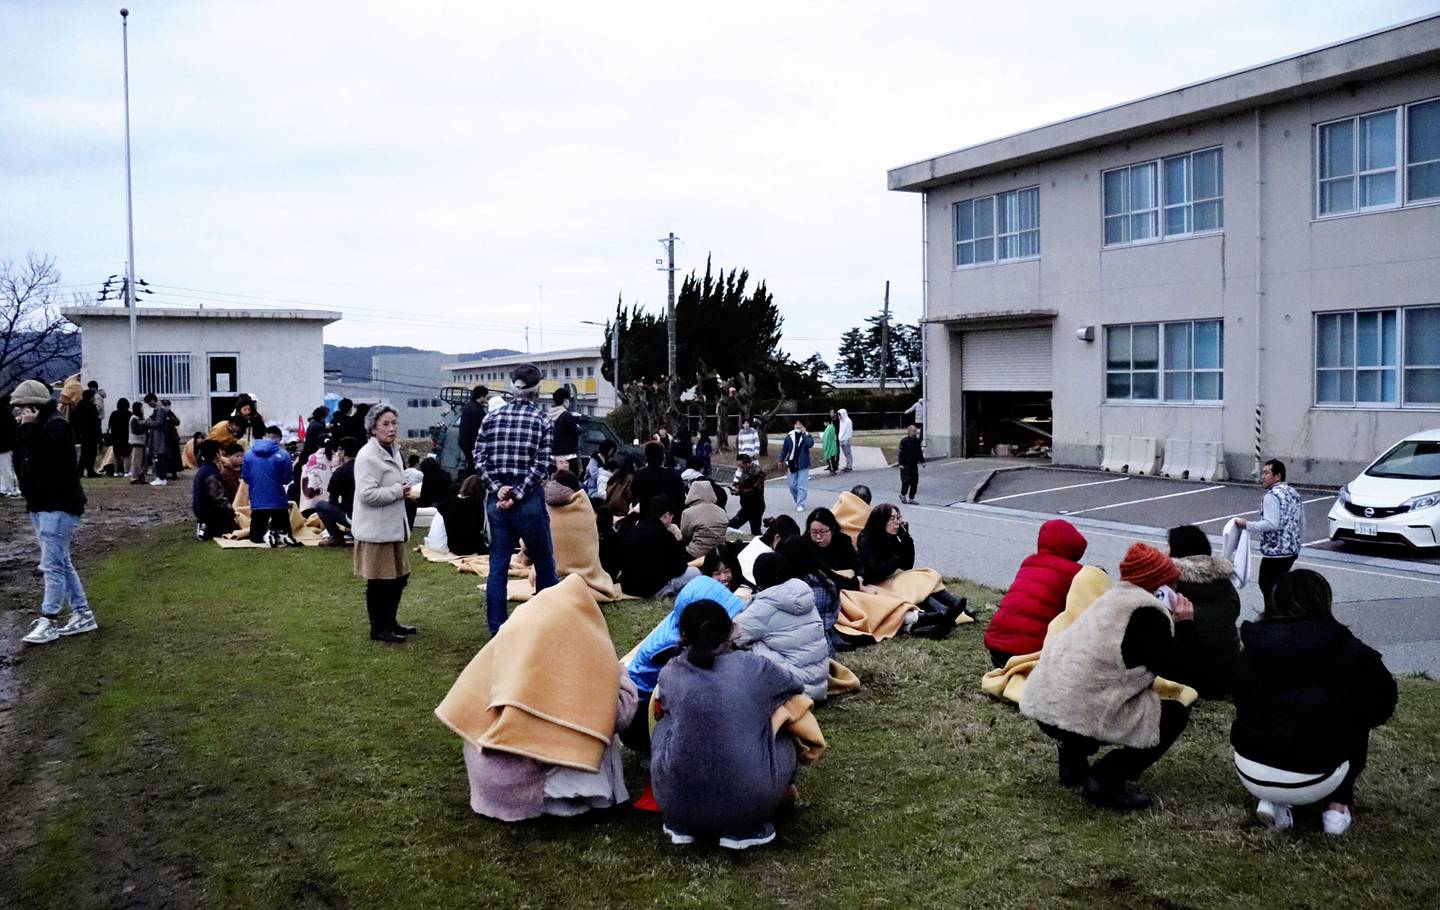 People sit outside in the open after evacuating from buildings in the city of Wajima, Ishikawa prefecture on January 1, 2024, after a major 7.5 magnitude earthquake struck the Noto region in Ishikawa prefecture in the afternoon. Tsunami waves over a metre high hit central Japan on January 1 after a series of powerful earthquakes that damaged homes, closed highways and prompted authorities to urge people to run to higher ground. (Photo by Yusuke FUKUHARA / Yomiuri Shimbun / AFP) / Japan OUT / NO ARCHIVES - MANDATORY CREDIT: Yomiuri Shimbun